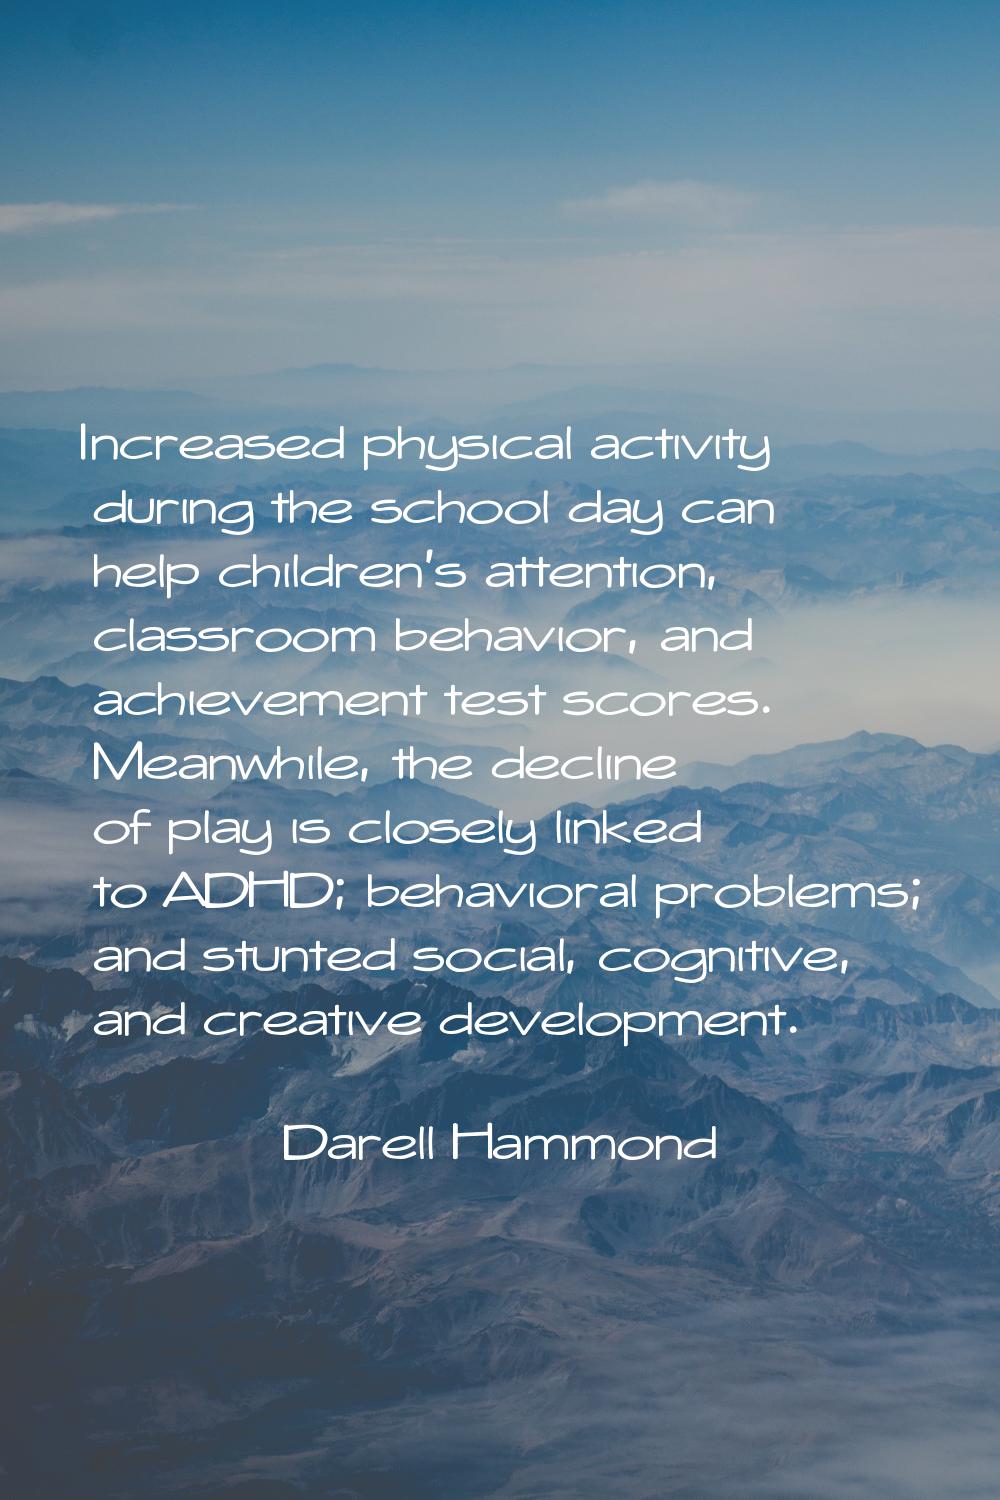 Increased physical activity during the school day can help children's attention, classroom behavior